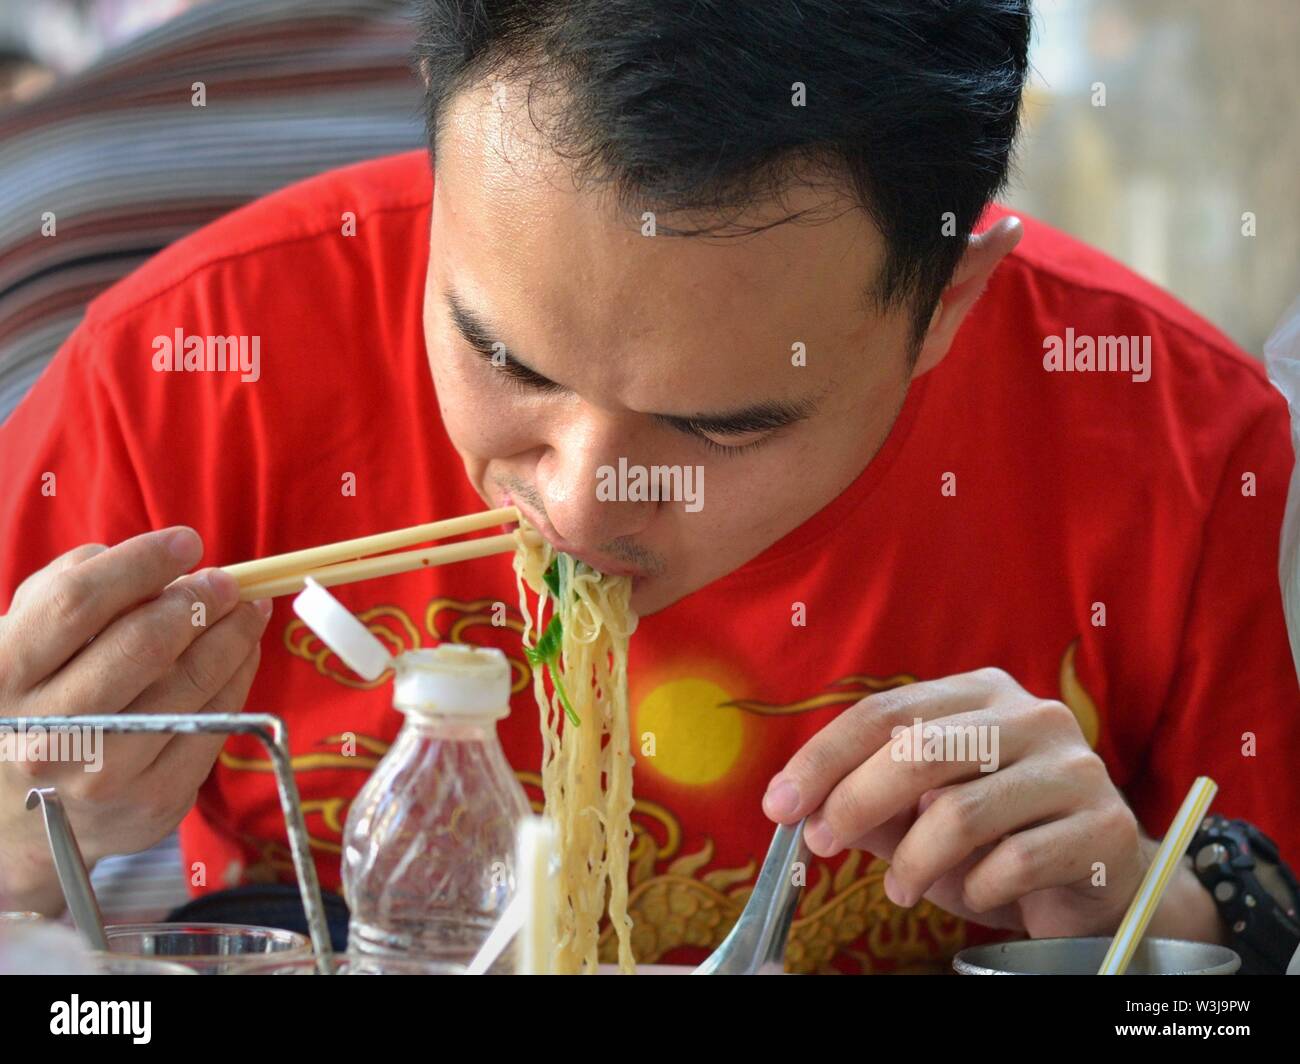 Middle-aged Thai man eats yellow noodles with chopsticks. Stock Photo